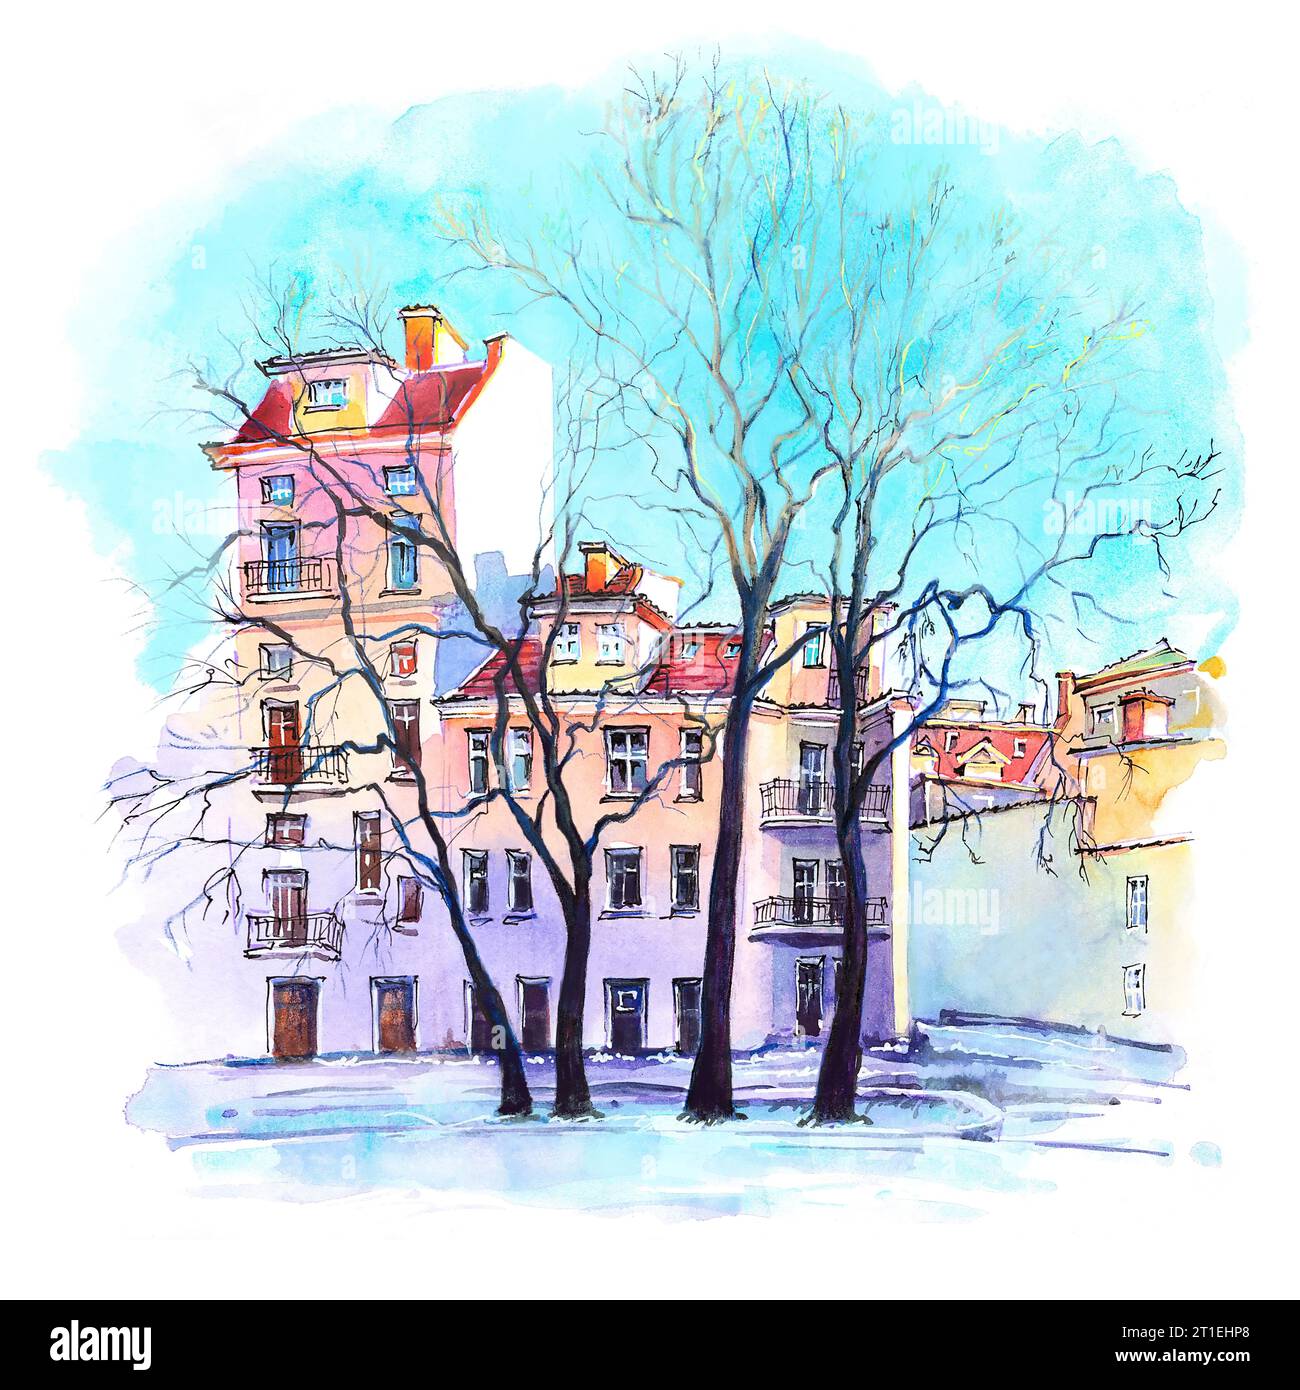 Watercolor sketch of cute colorful houses in winter, Poznan, Poland Stock Photo